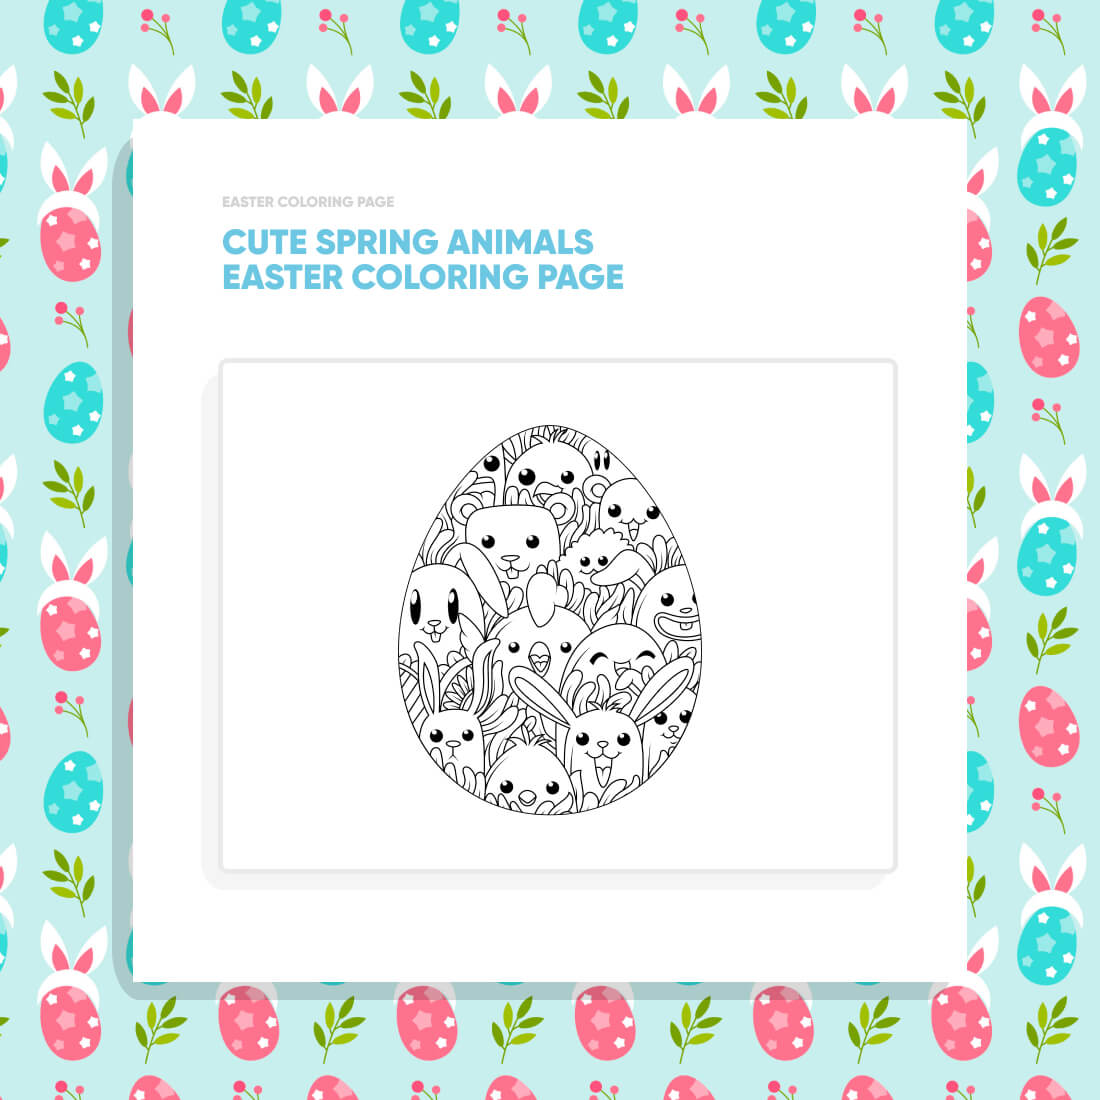 Cute Spring Animals Easter Coloring Page cover image.